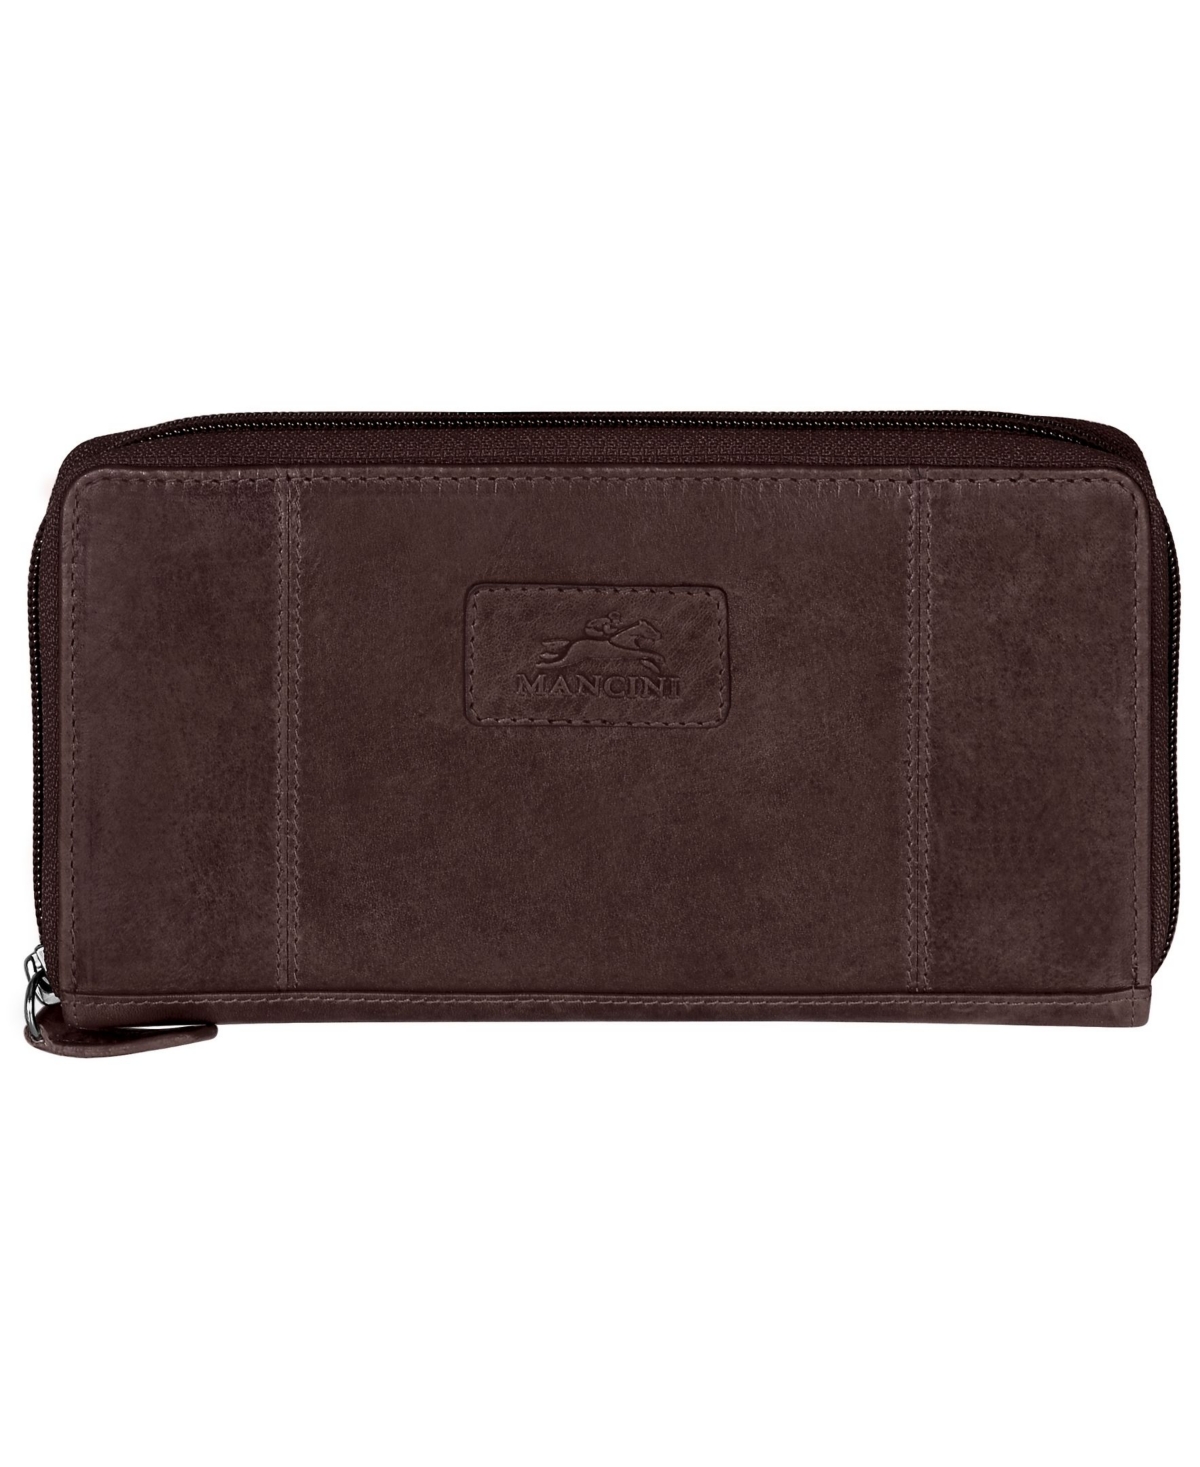 Casablanca Collection Rfid Secure Zippered Clutch Wallet - Black